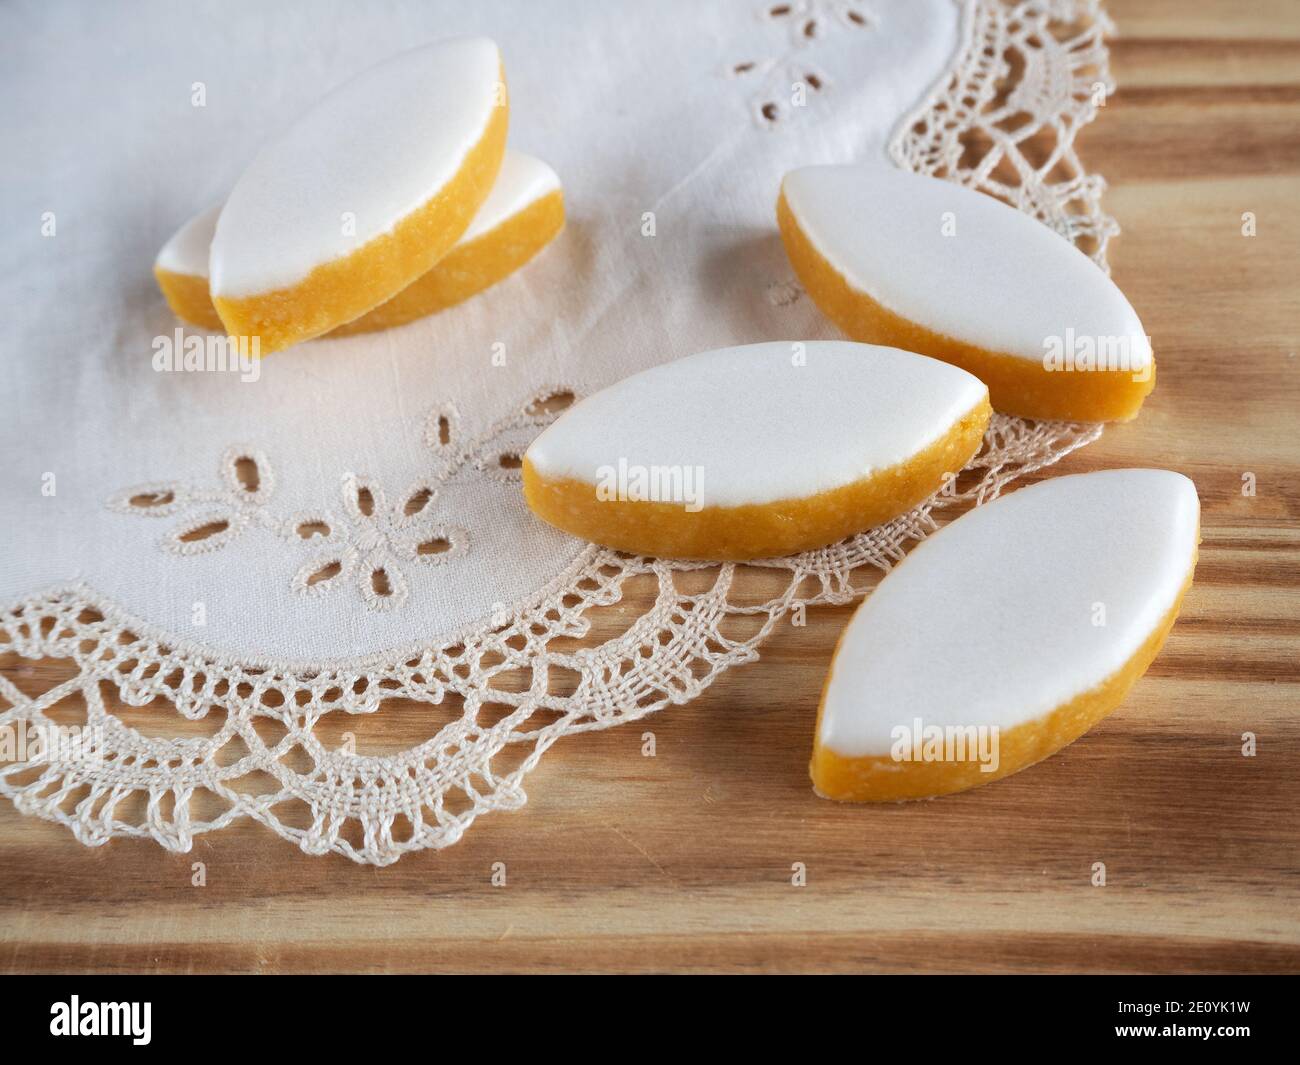 Typical almond sweets from france calissons d'aix Stock Photo - Alamy